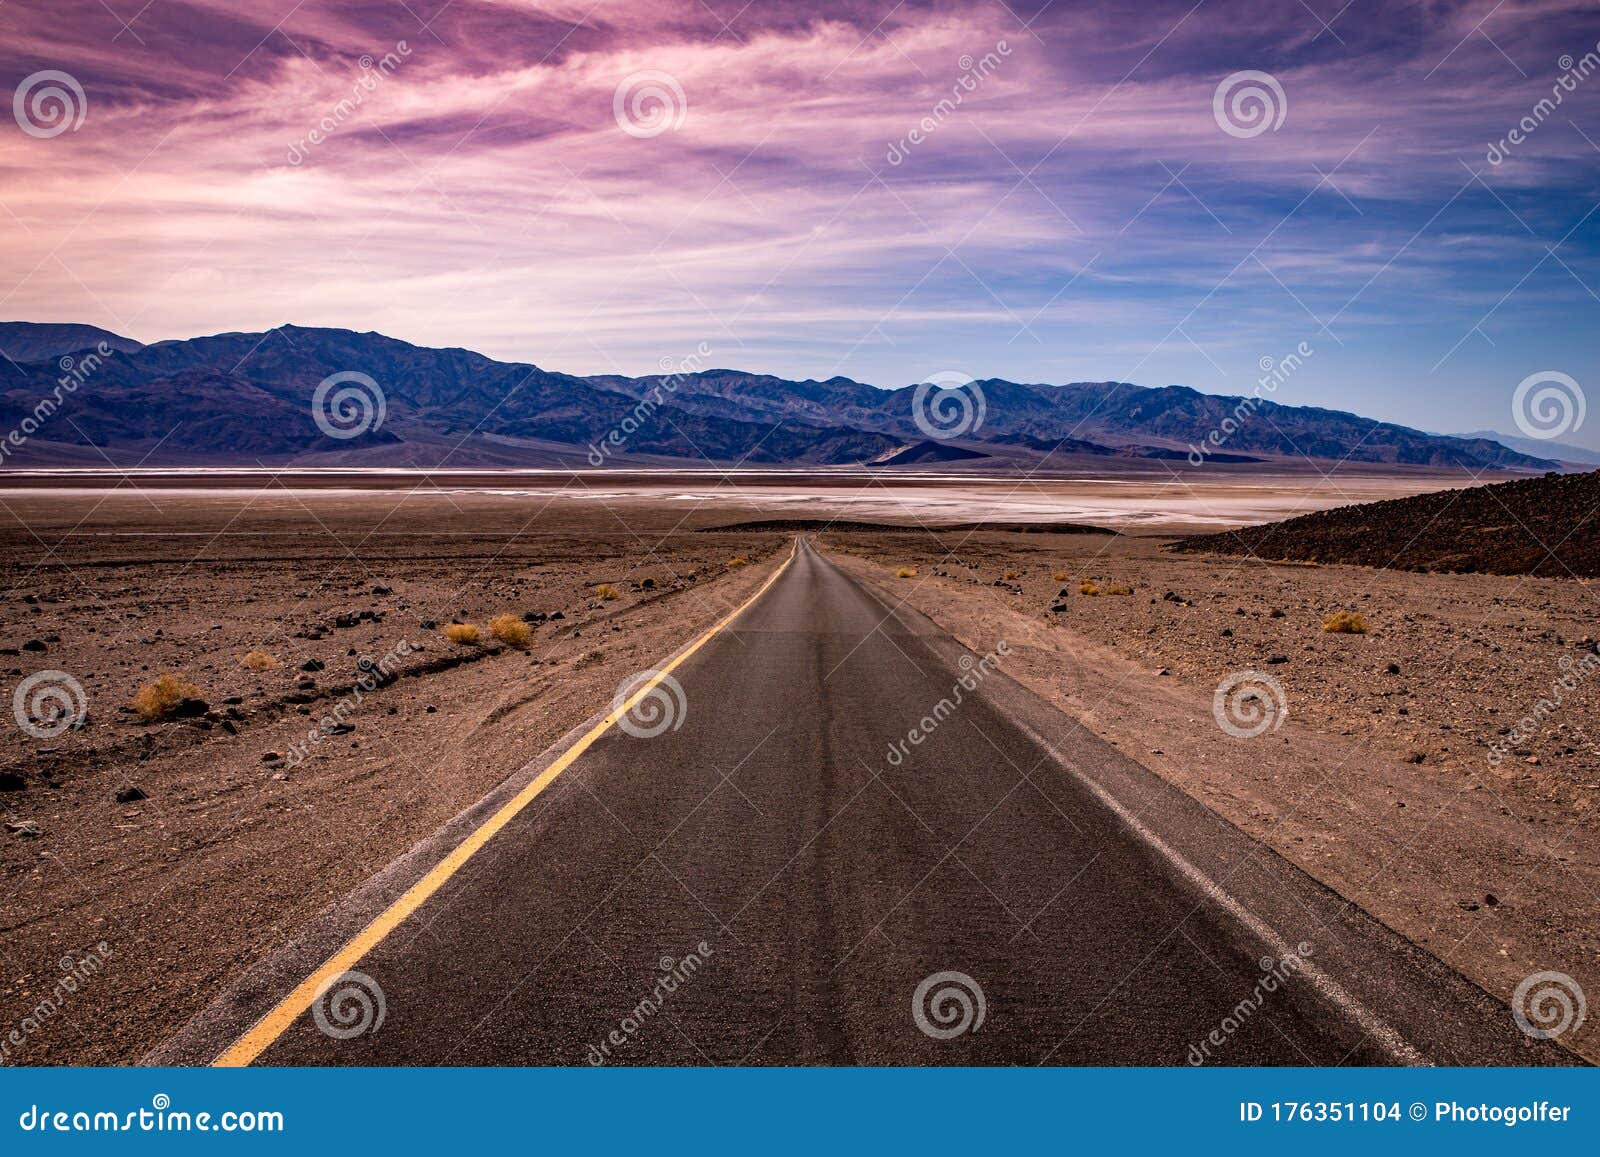 Road Lines in Death Valley, California, Usa Stock Photo - Image of ...